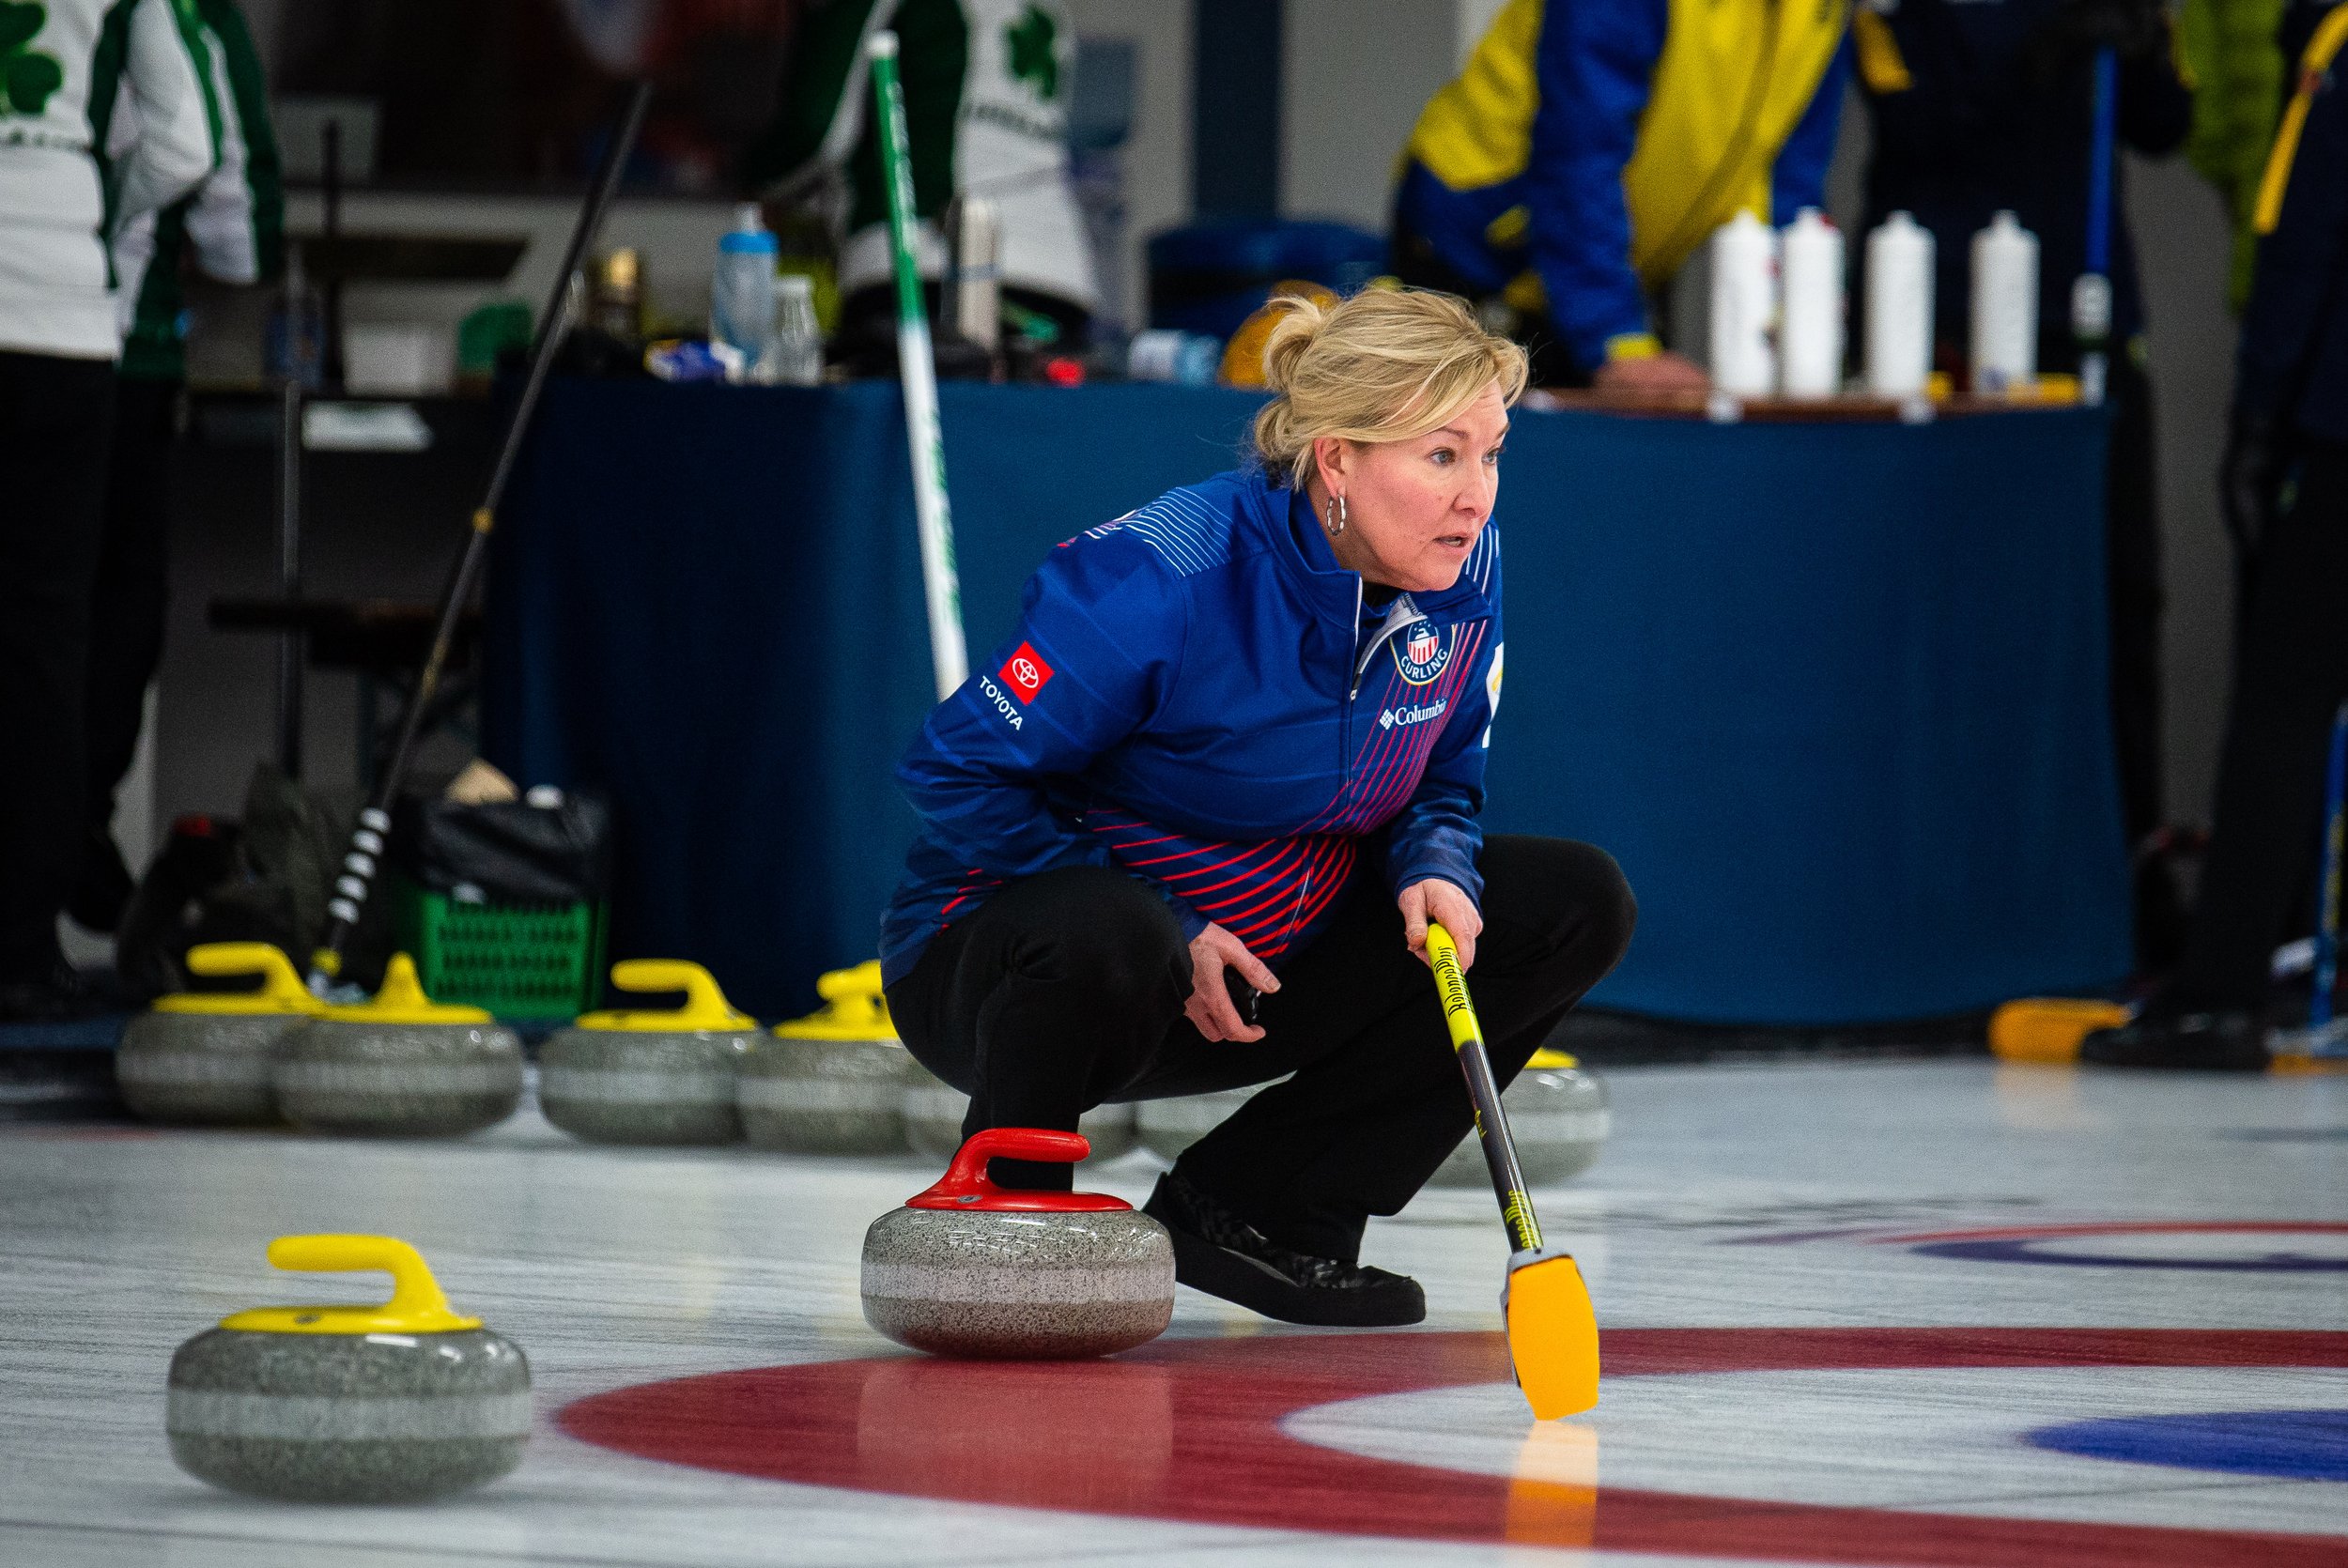 COMBINED 3-0 START FOR USA AT WORLD MIXED DOUBLES AND SENIOR CURLING CHAMPIONSHIPS 2022 — USA CURLING